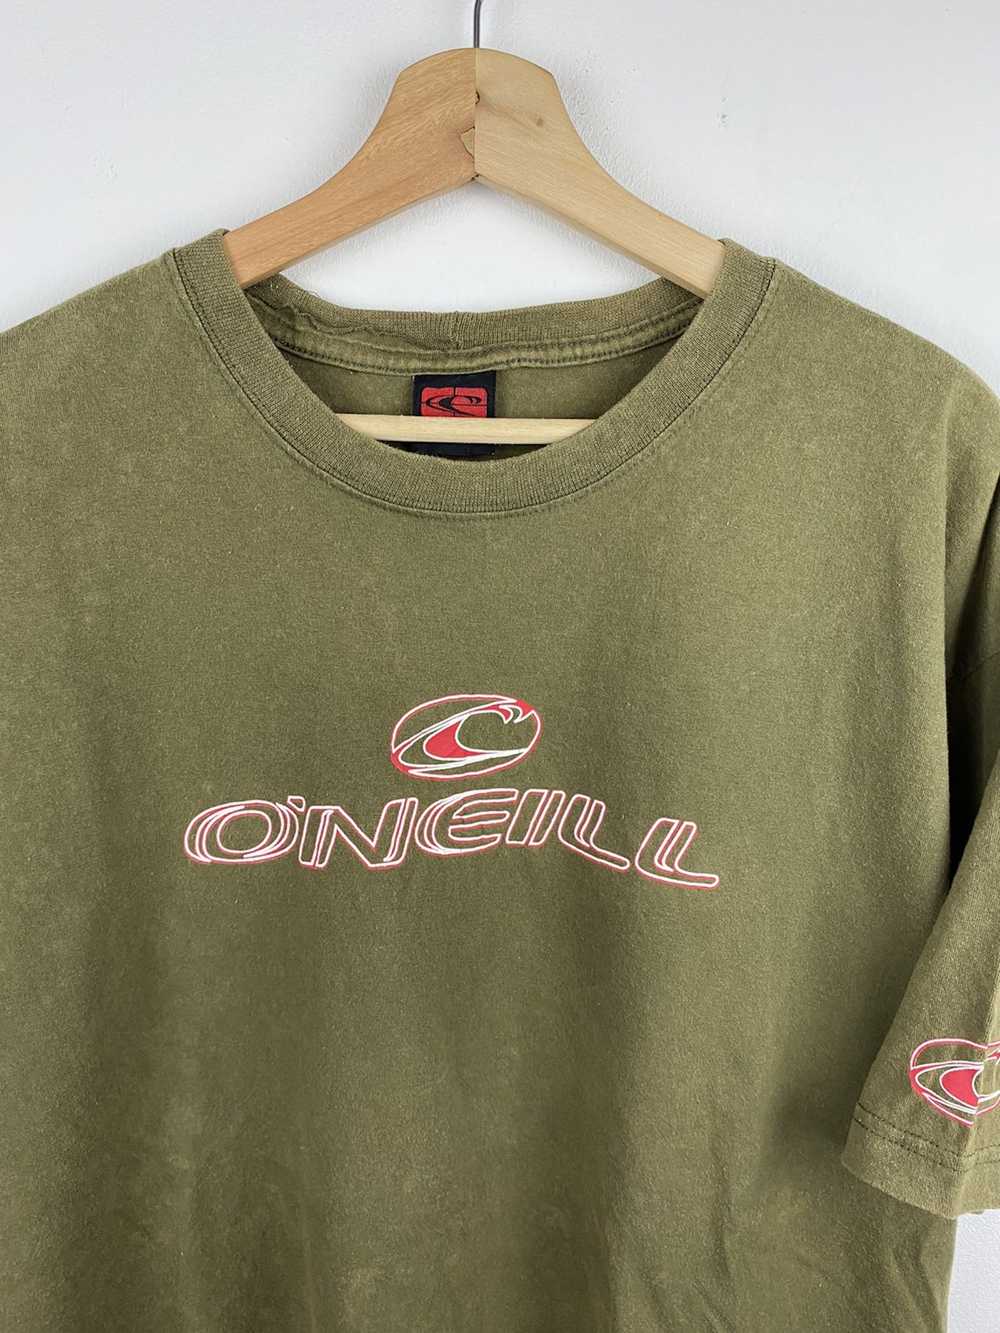 Oneill × Surf Style × Vintage Vintage Oneill Surf - image 2